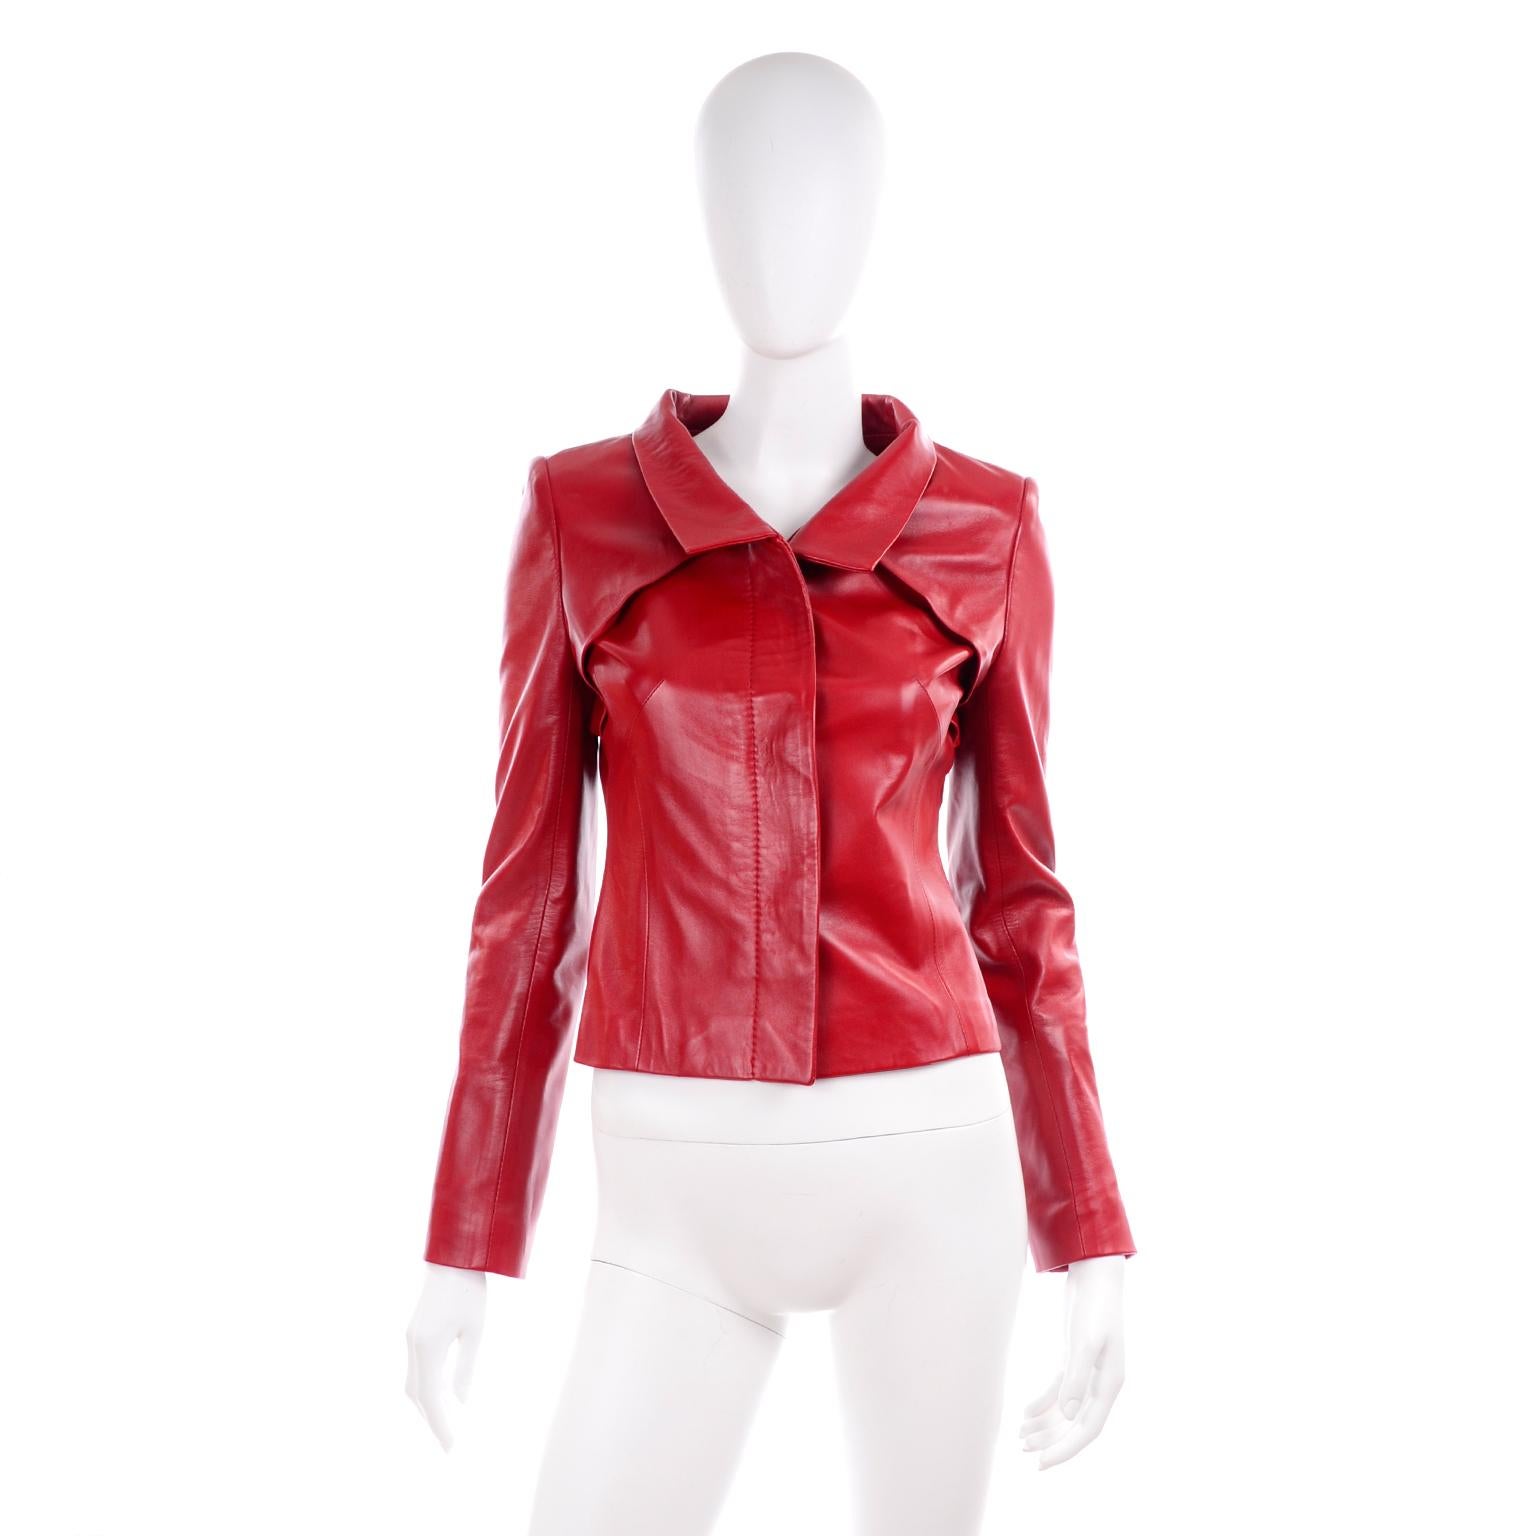 This is a gorgeous Jean Louis Scherrer cherry red lambskin leather jacket with unique pleating details. Designed during Stephane Rolland's time as artistic director of the brand. The jacket buttons up the front with red buttons covered with a